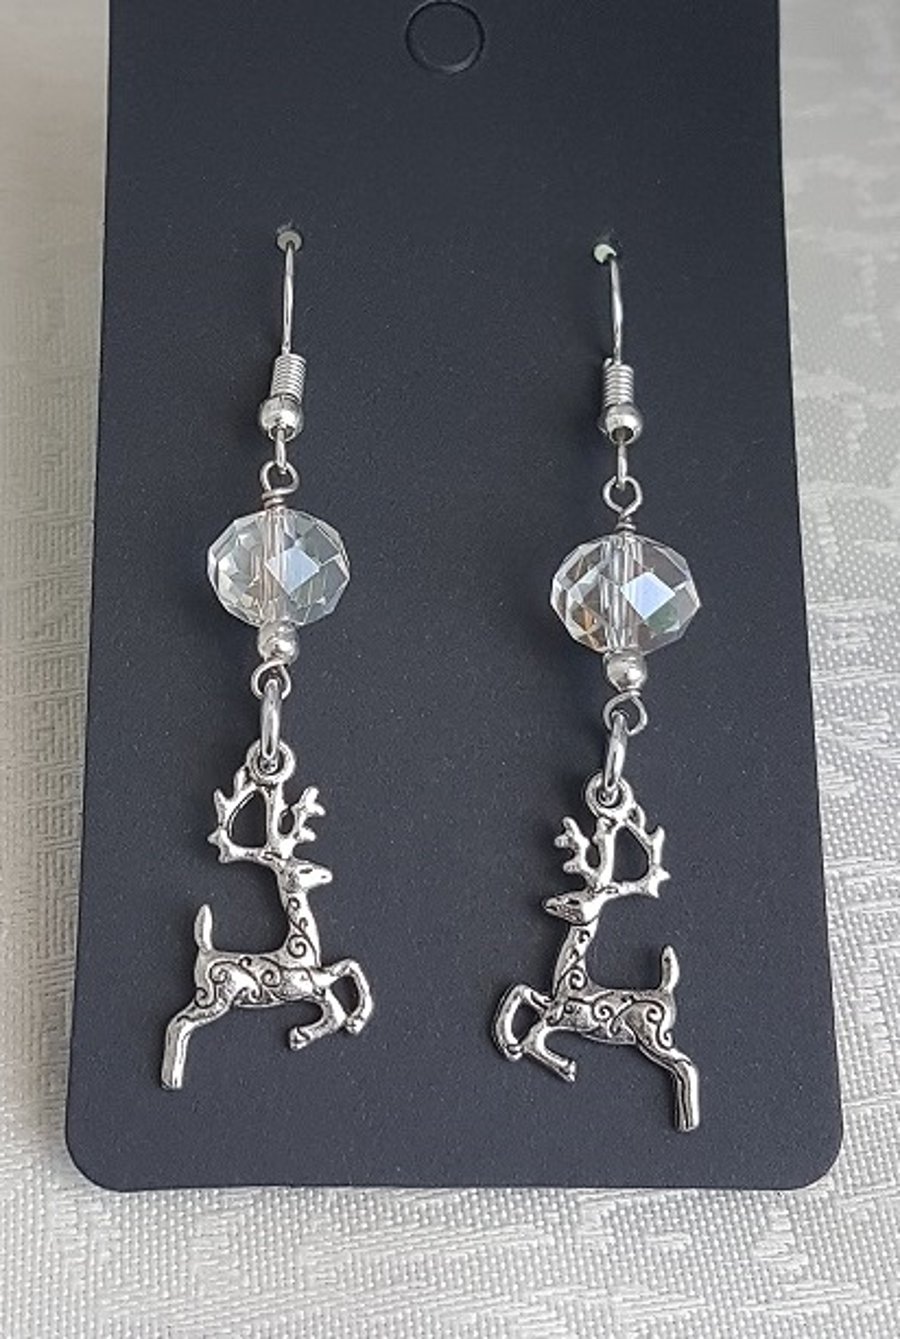 Gorgeous Reindeer Charm Festive Earrings with crystals